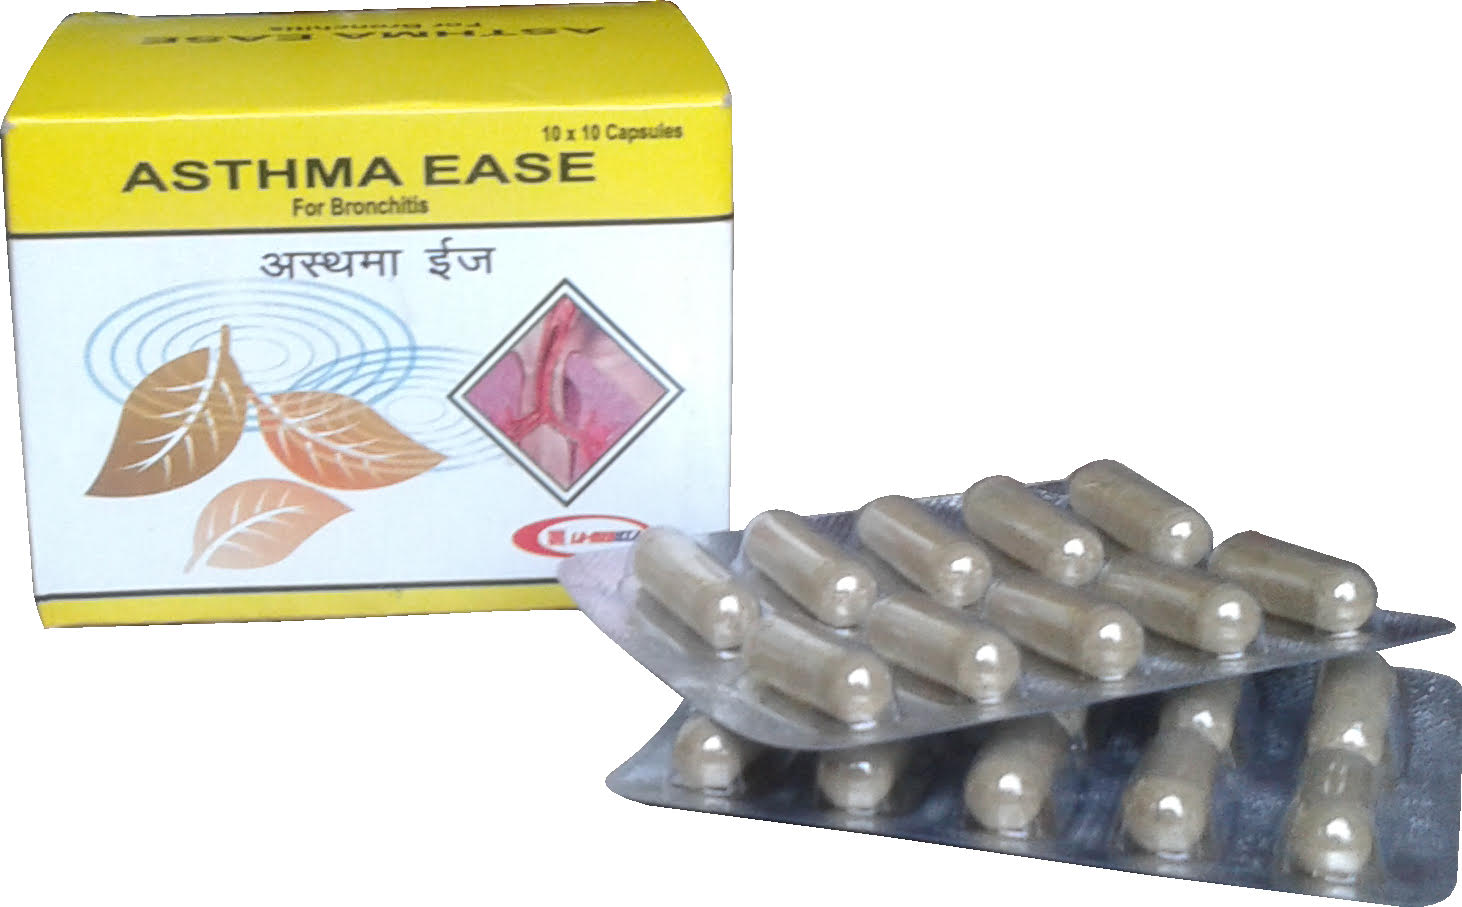 Buy Asthma Ease Capsules at Best Price Online